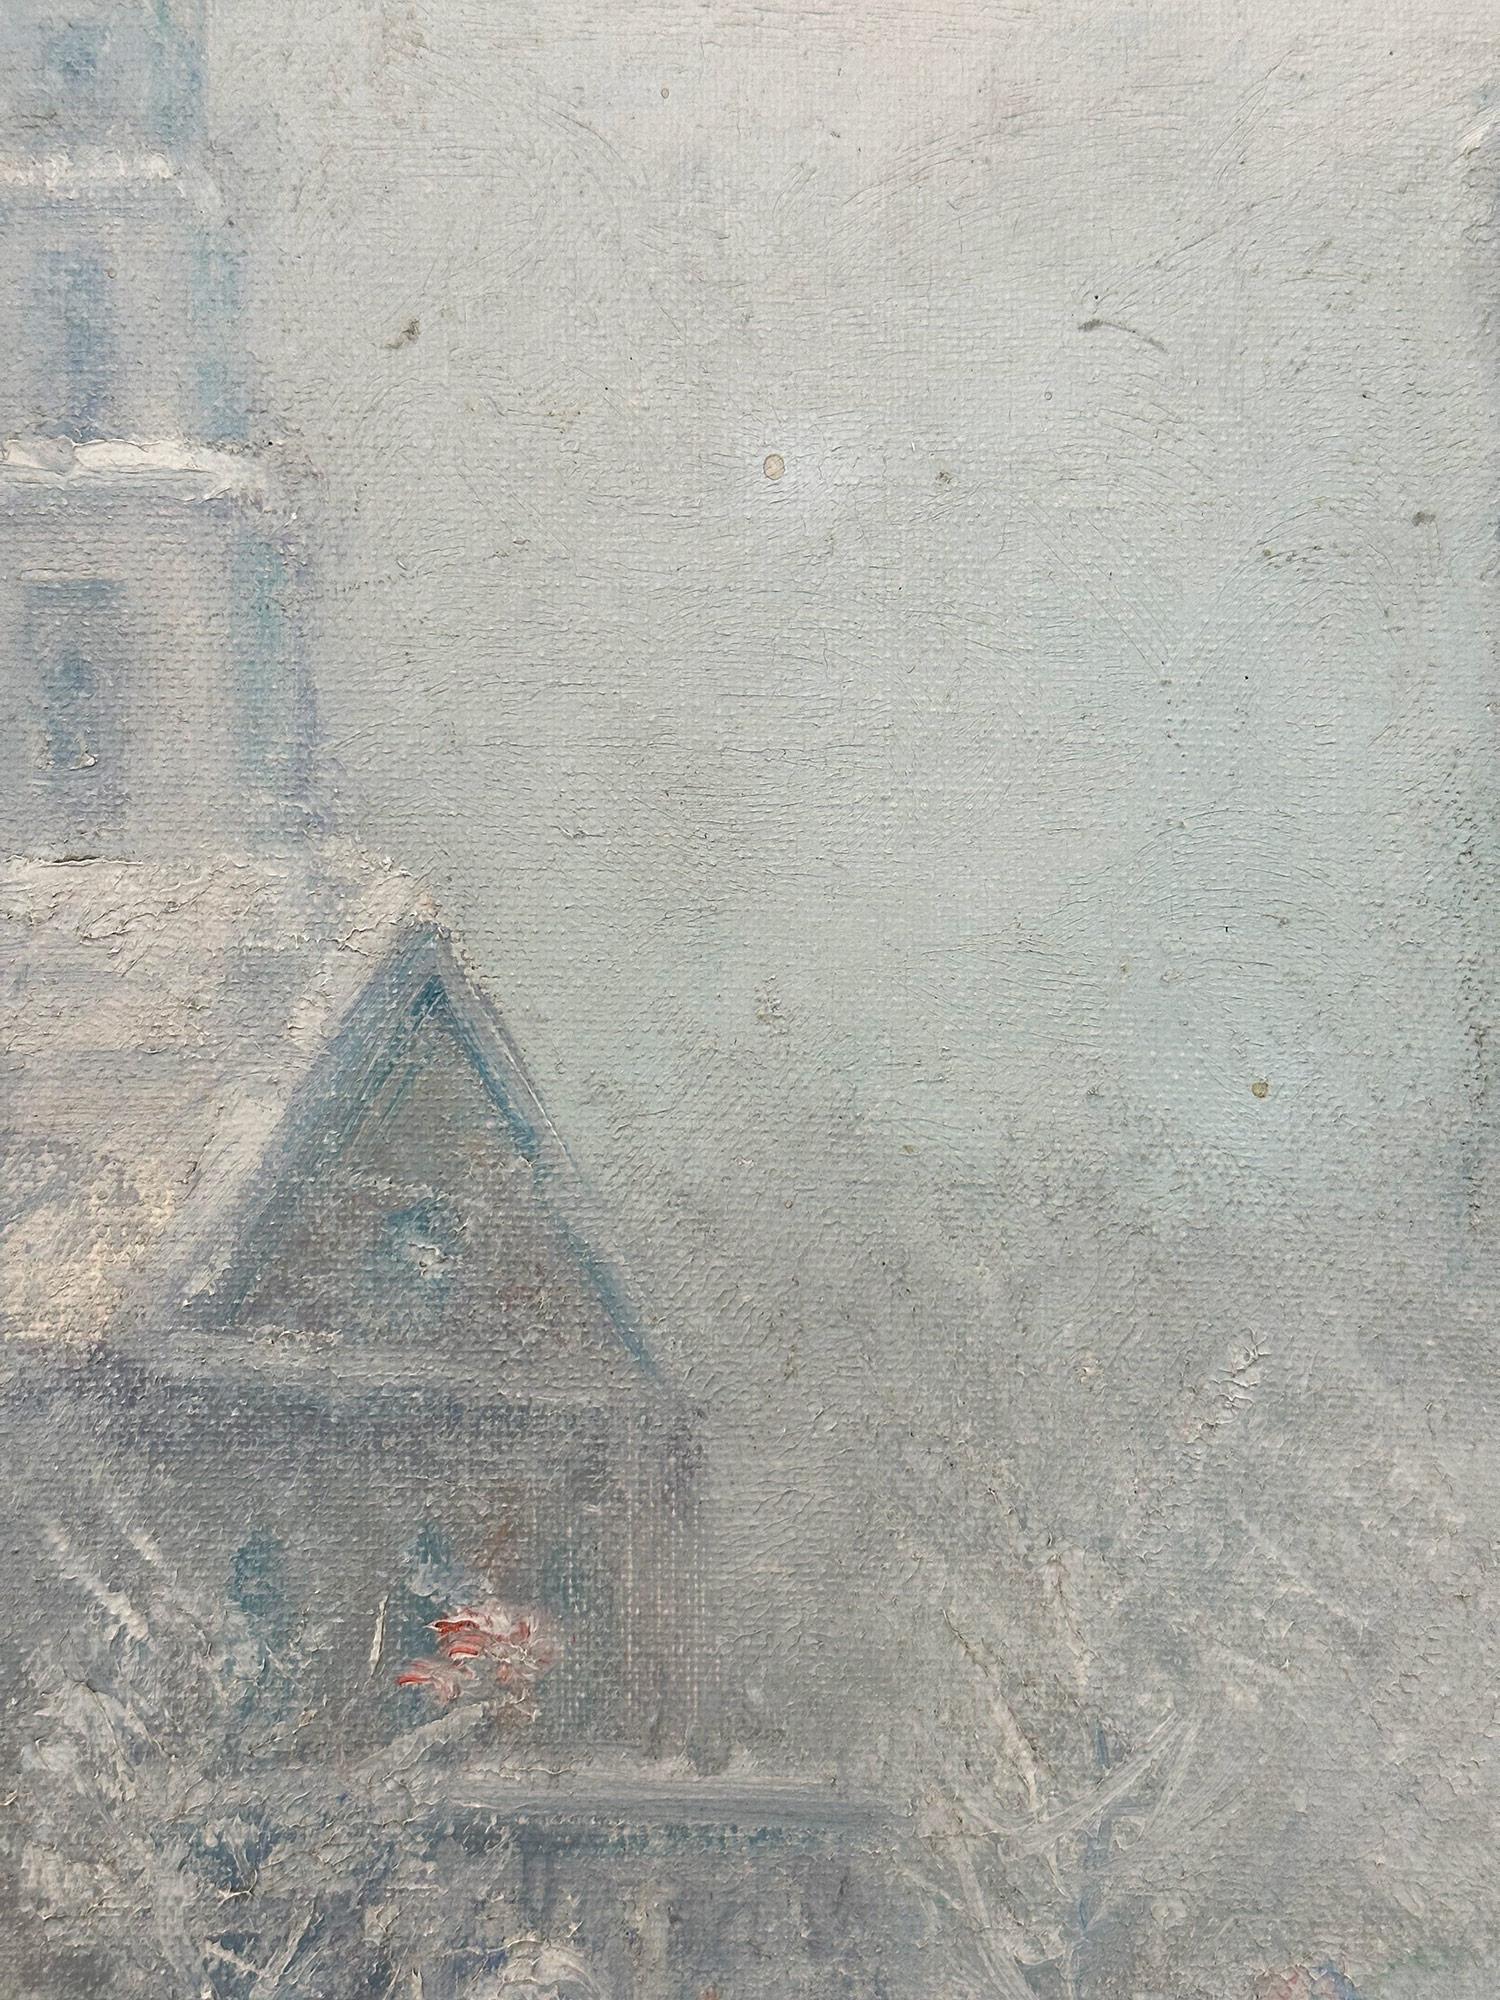 A stunning and pertinent example of Berthelsen's charming New York City winter scenes depicting Saint Paul's Chapel in the snow. It was built in 1766 as the chapel building of Trinity Church, located at 209 Broadway, between Fulton Street and Vesey